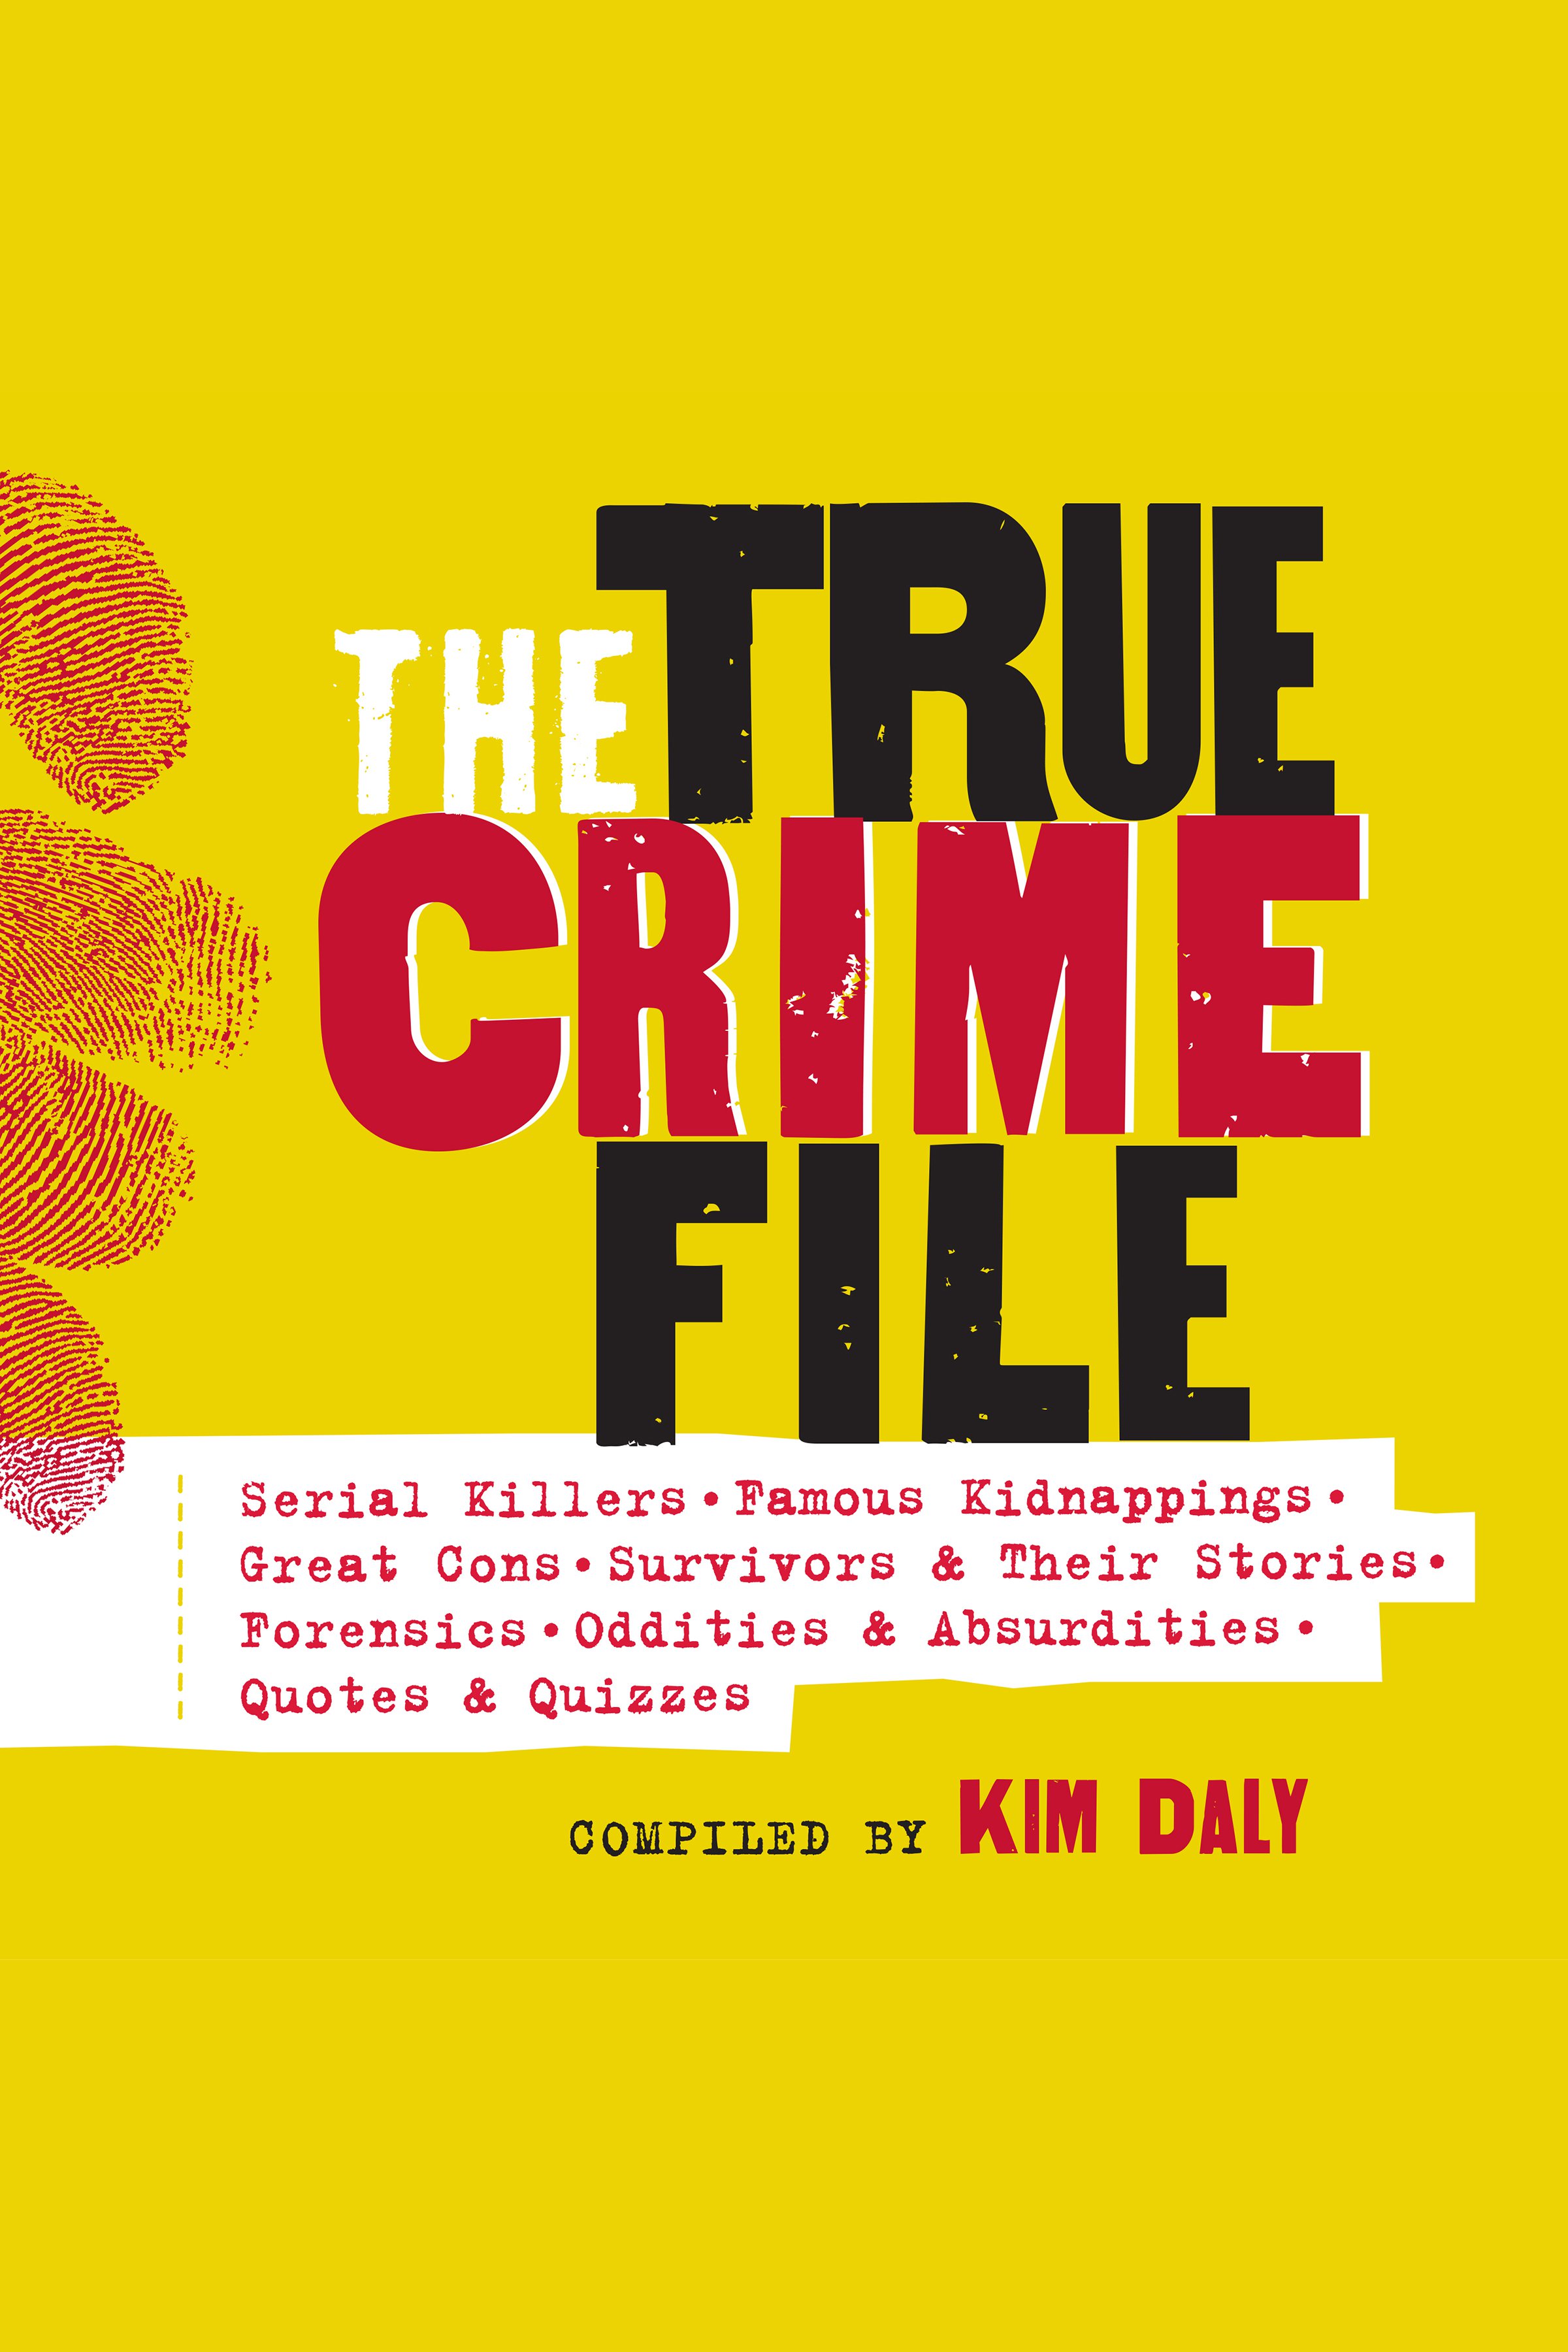 The True Crime File Serial Killers, Famous Kidnappings, Great Cons, Survivors & Their Stories, Forensics, Oddities & Absurdities, Quotes & Quizzes cover image